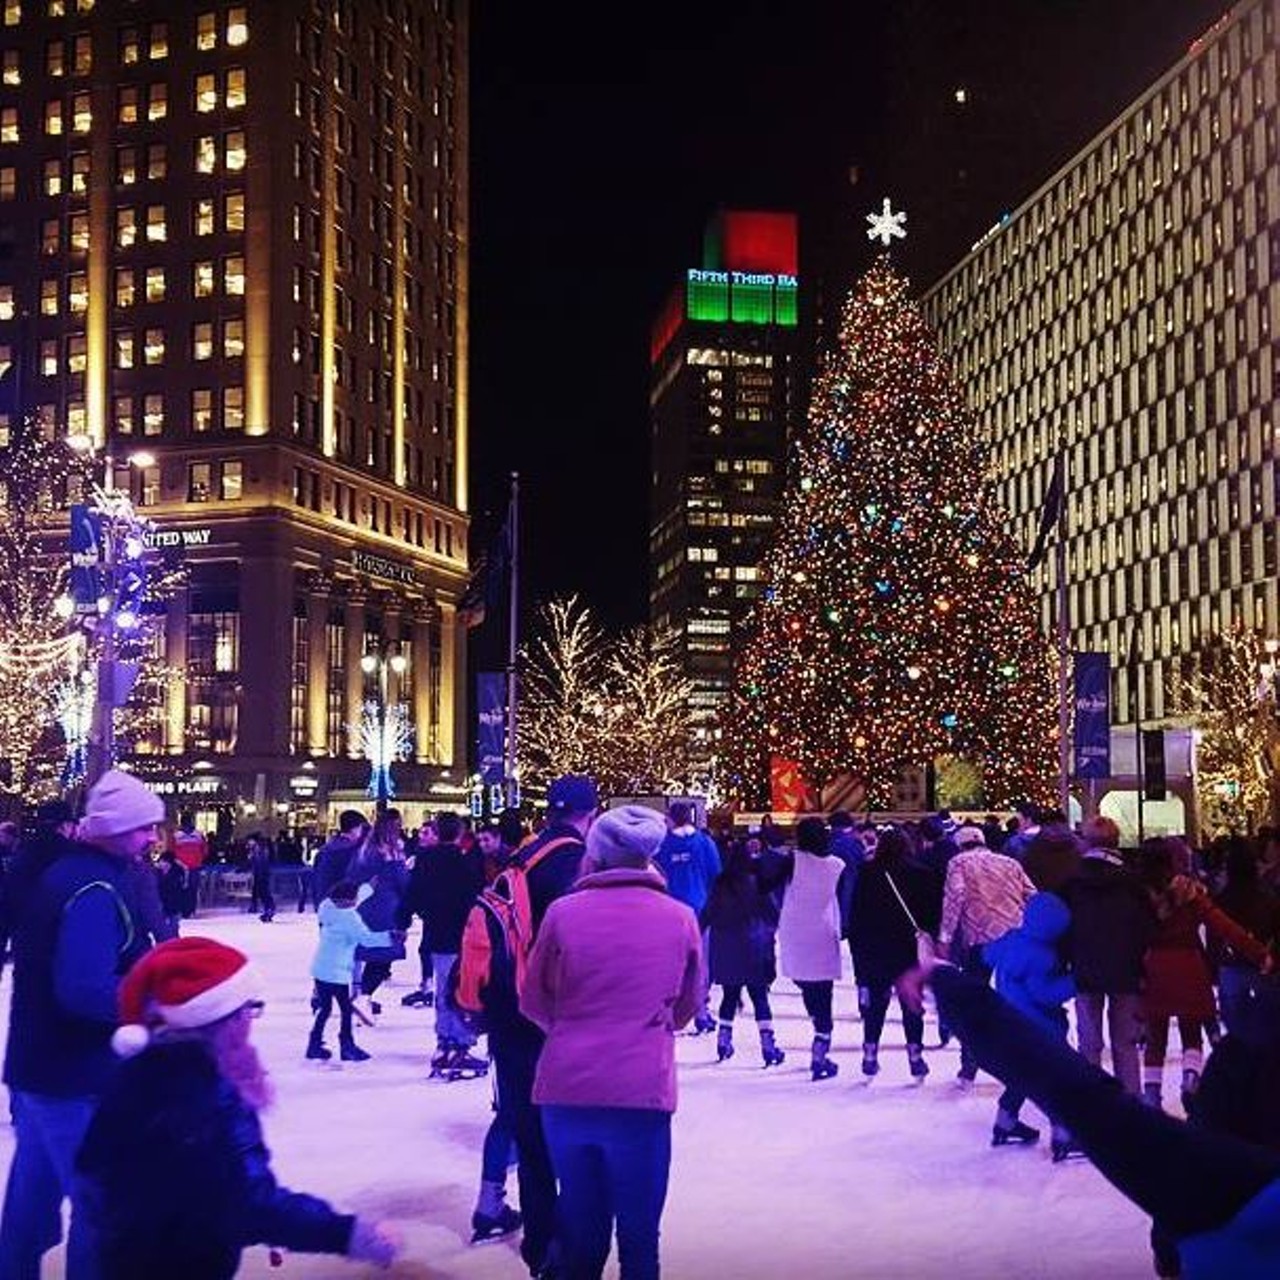 Go ice skating at Campus Martius
800 Woodward Ave., Detroit; 313-963-9393
Campus Martius is the perfect place to go any time of the year, but the holidays are when this Detroit gem really comes alive. Ice skate beneath a towering 60-foot Christmas tree and take advantage of nearby coffee shops when it gets a little too chilly. Adult admission is $8, children younger than 12 is $7, and seniors over 65 years old are $7. Skates are available for rental for $4. The rink is open everyday including holidays, but hours vary.
Photo via Instagram user @simon_olga_